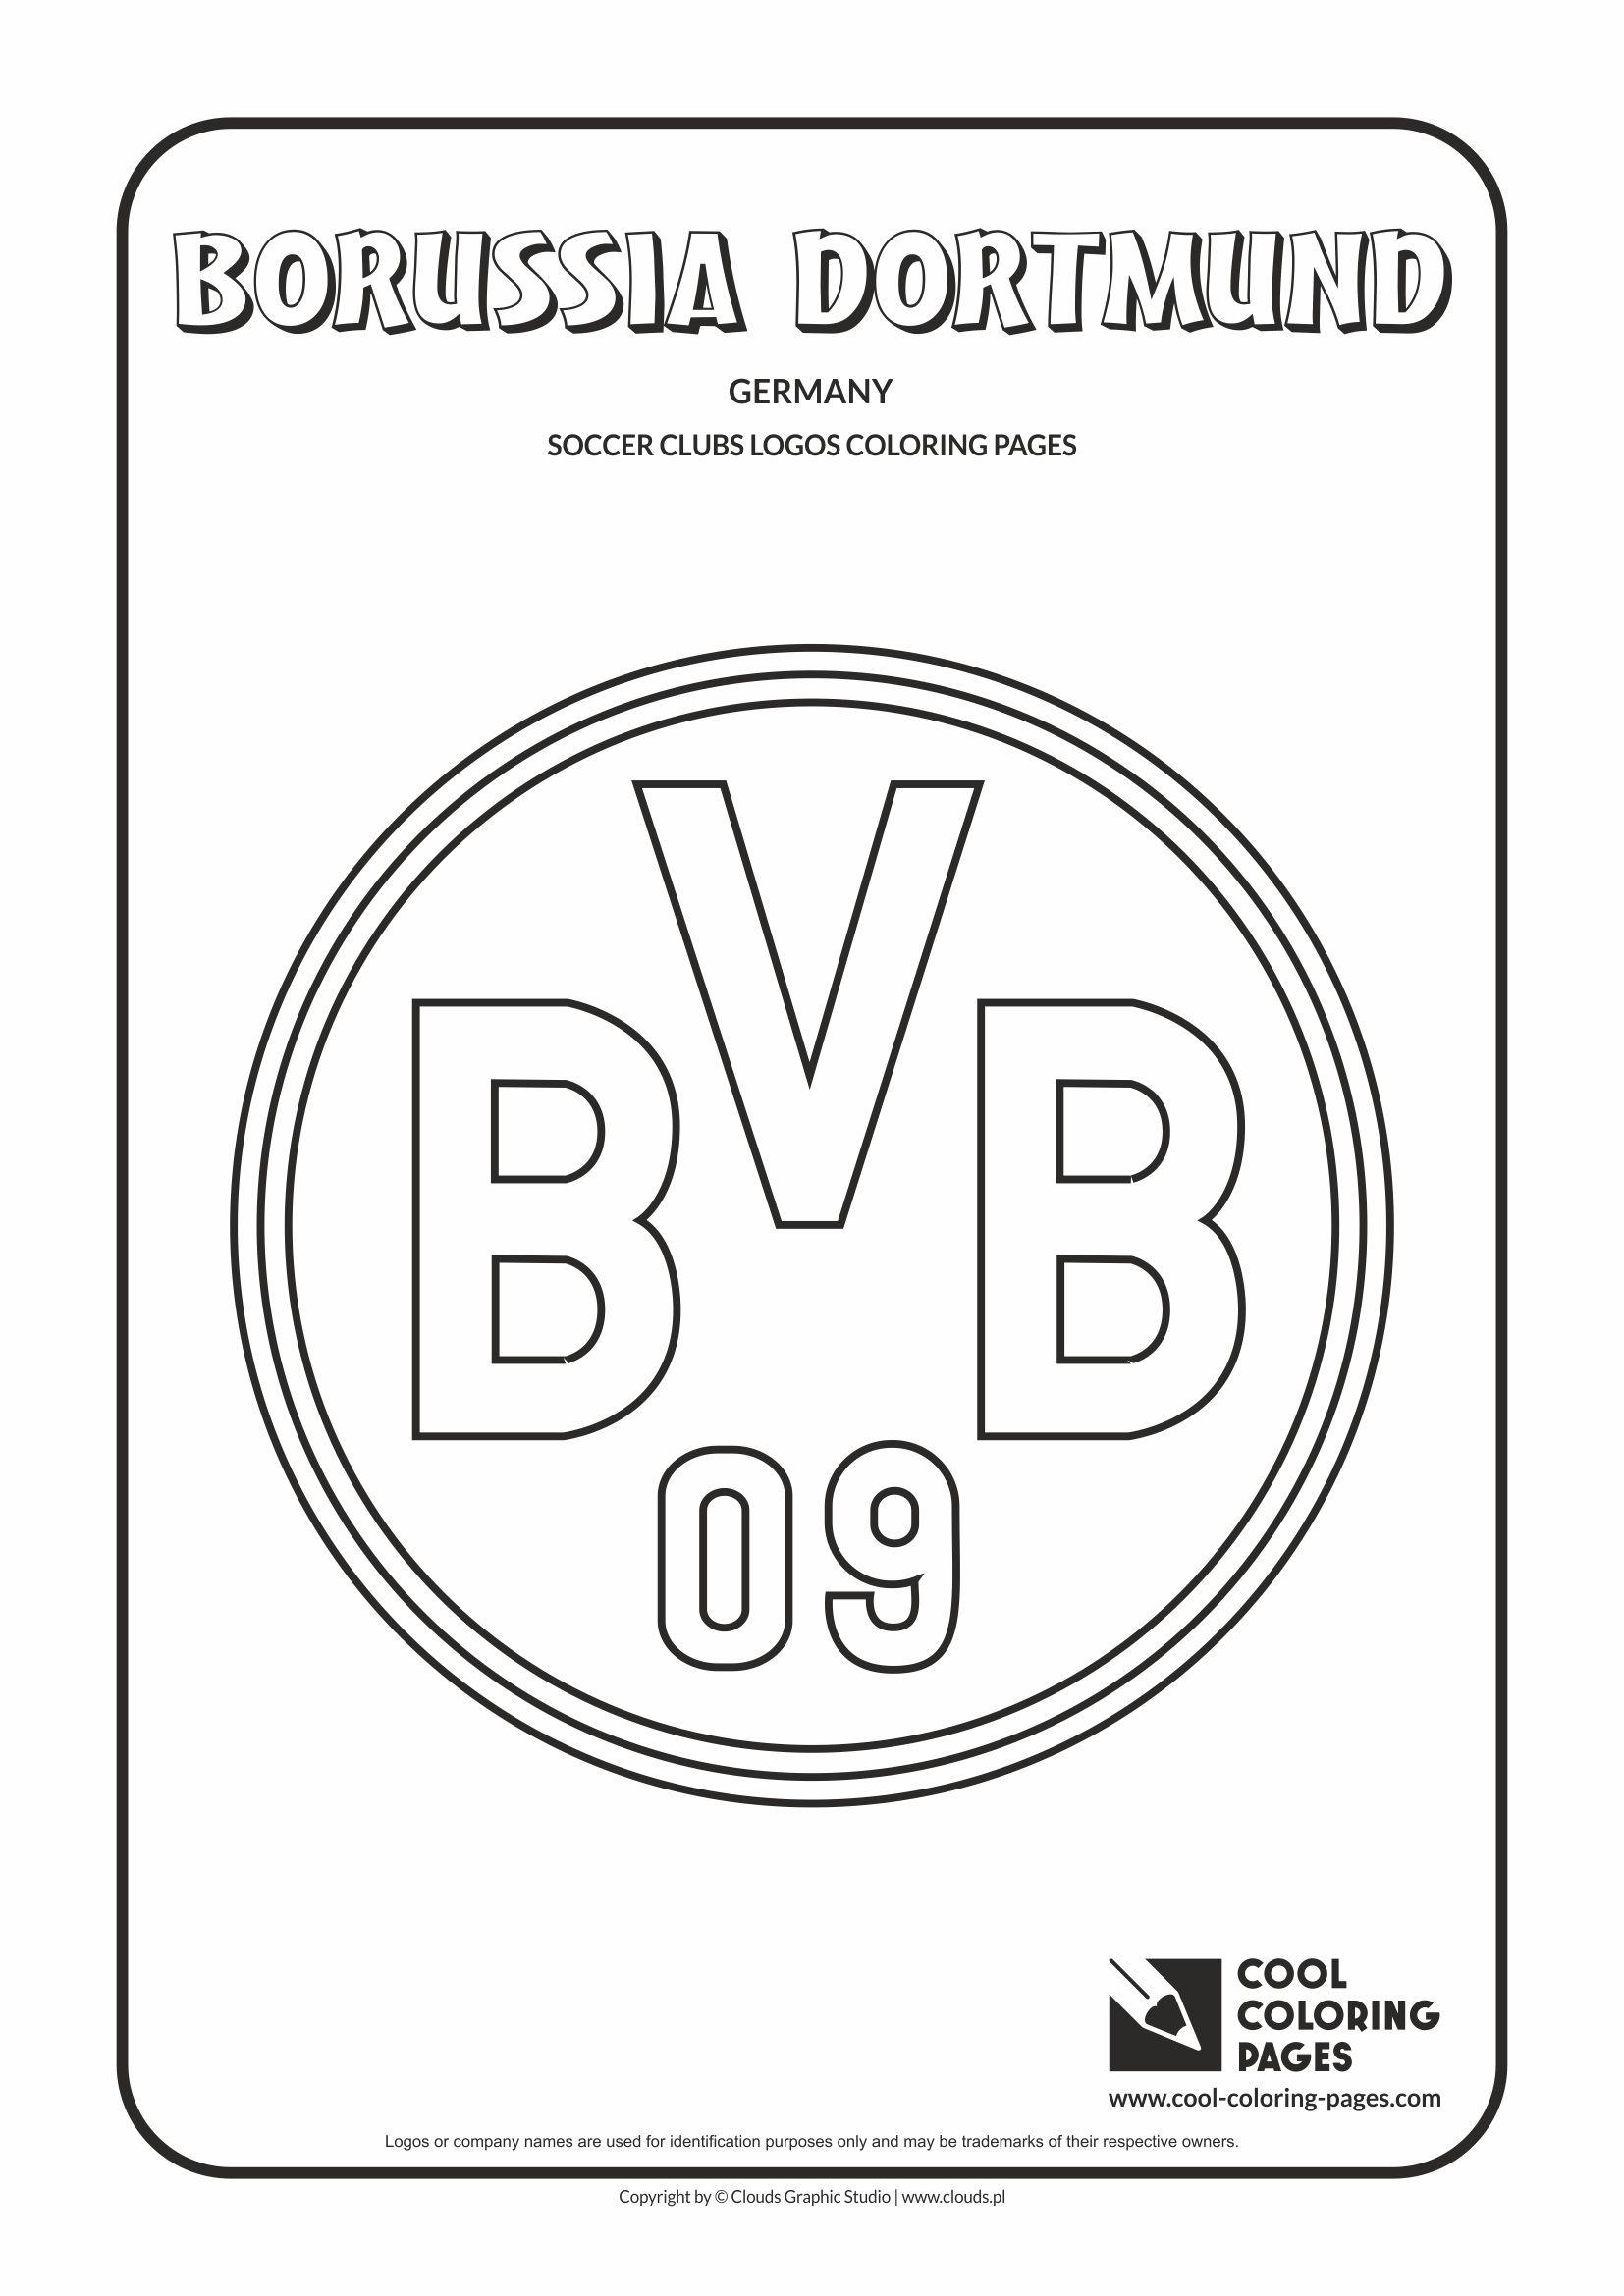 Cool Coloring Pages Borussia Dortmund Logo Coloring Page Cool Coloring Pages Free Educational Coloring Pages And Activities For Kids